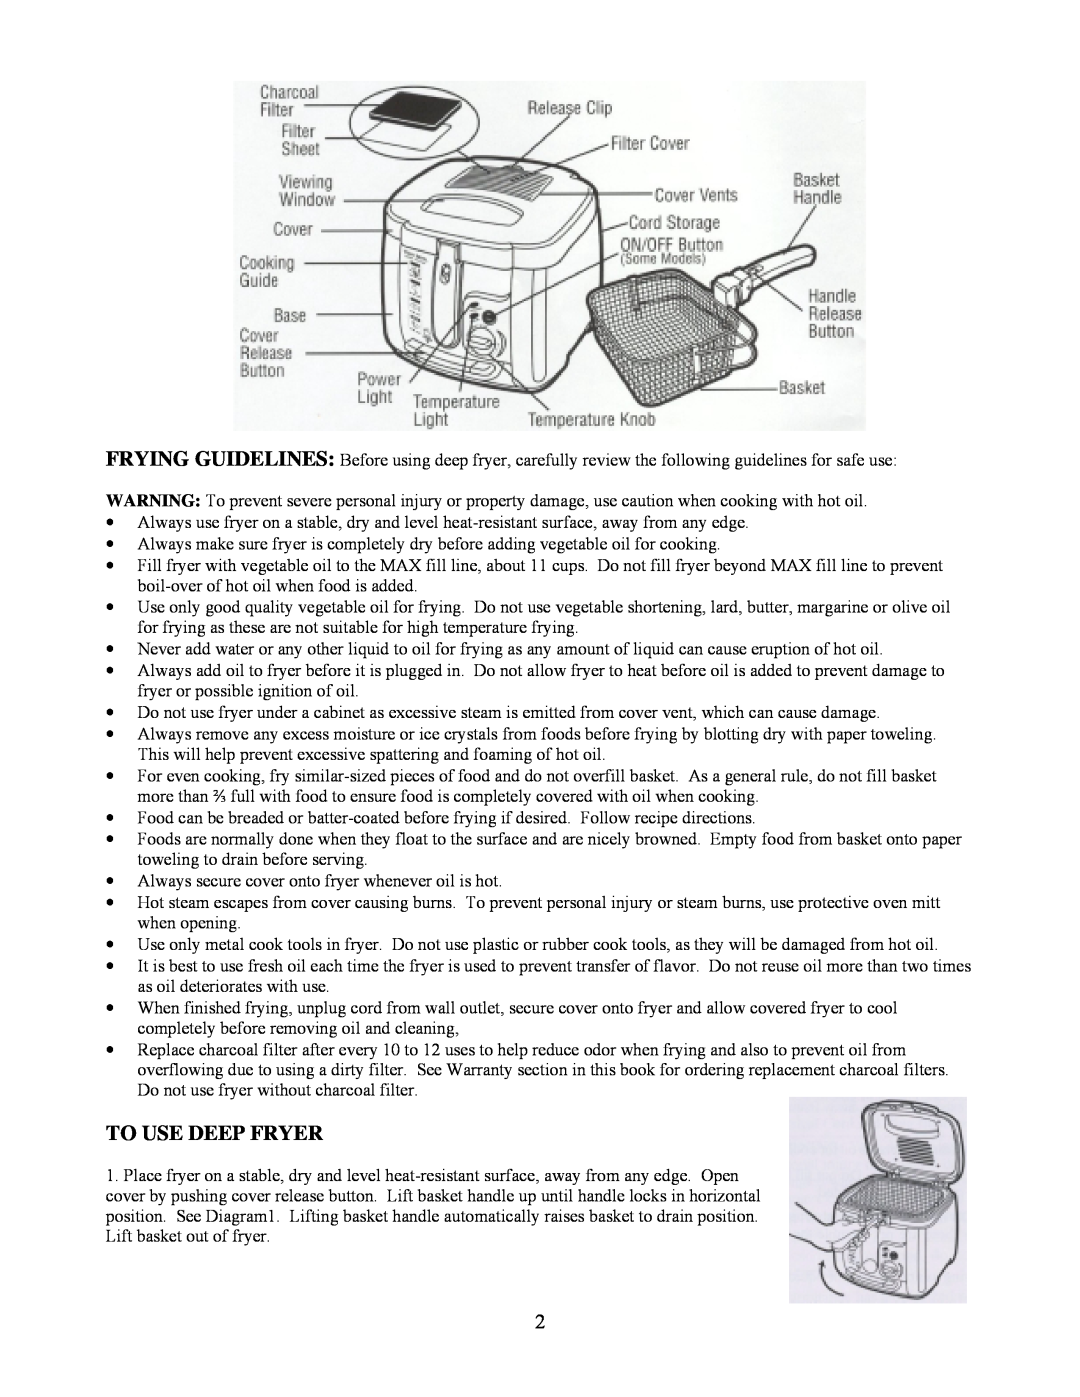 West Bend L 5265 instruction manual To Use Deep Fryer 